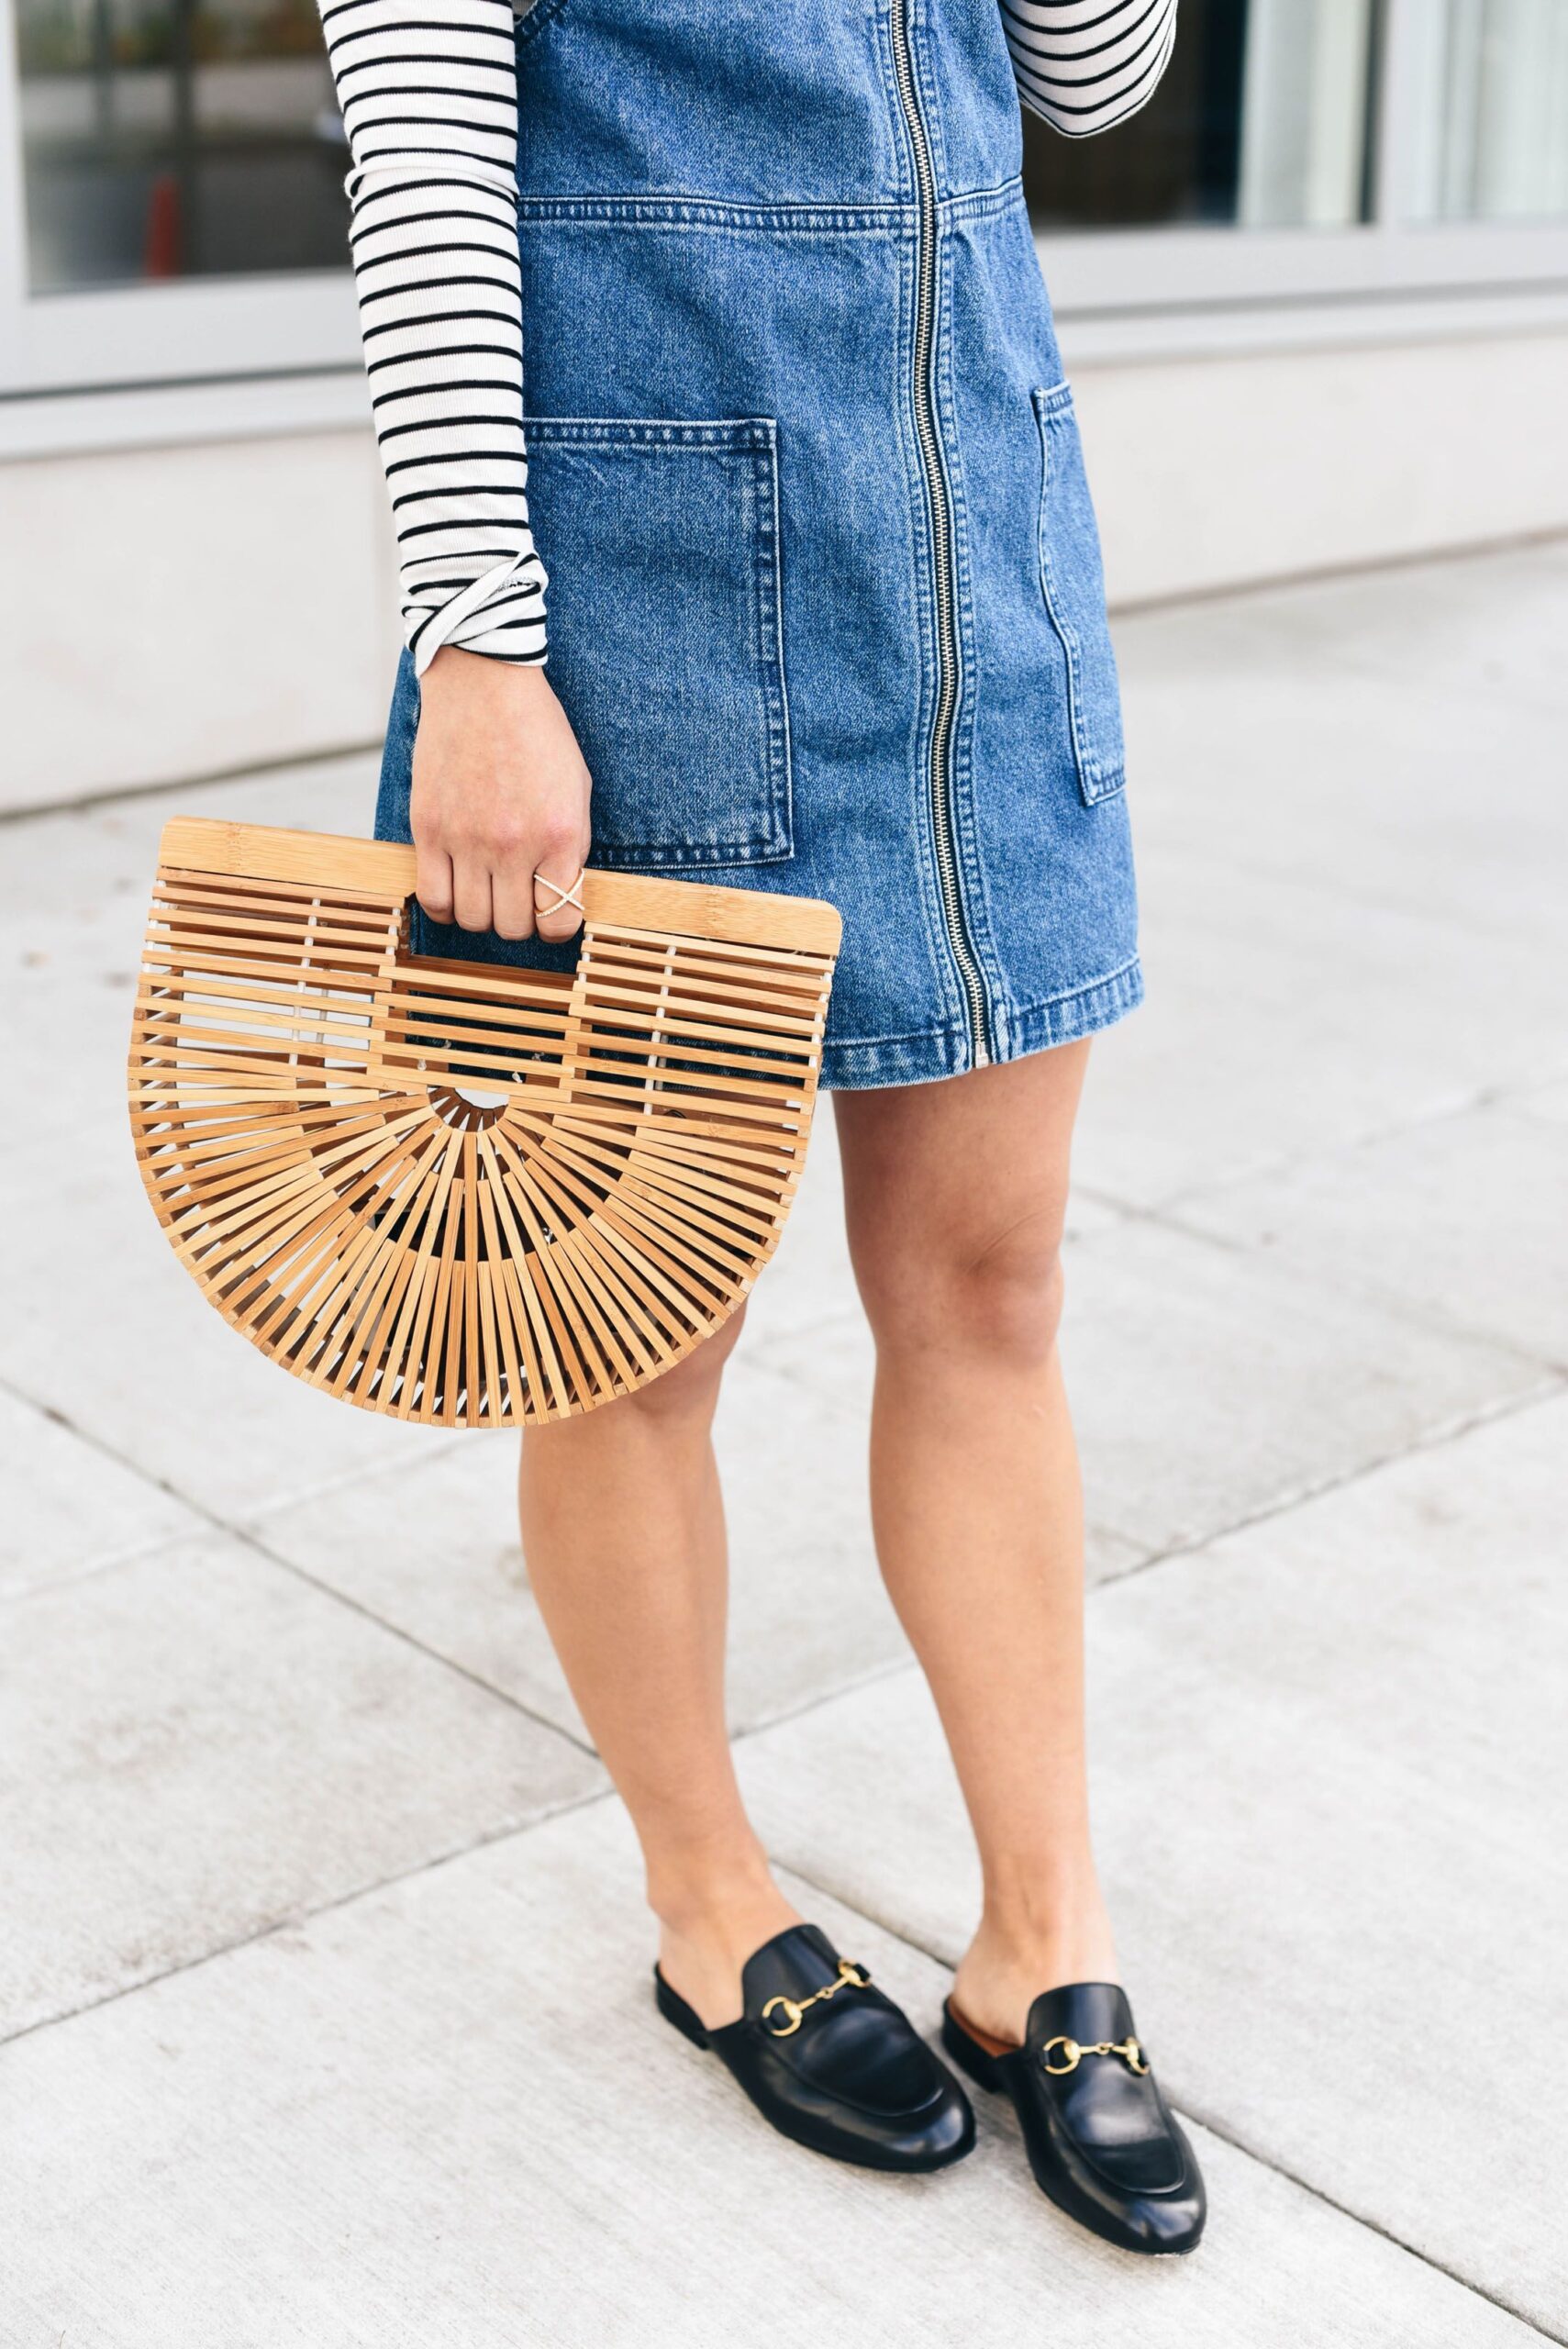 Pinafore Dress Outfit Ideas